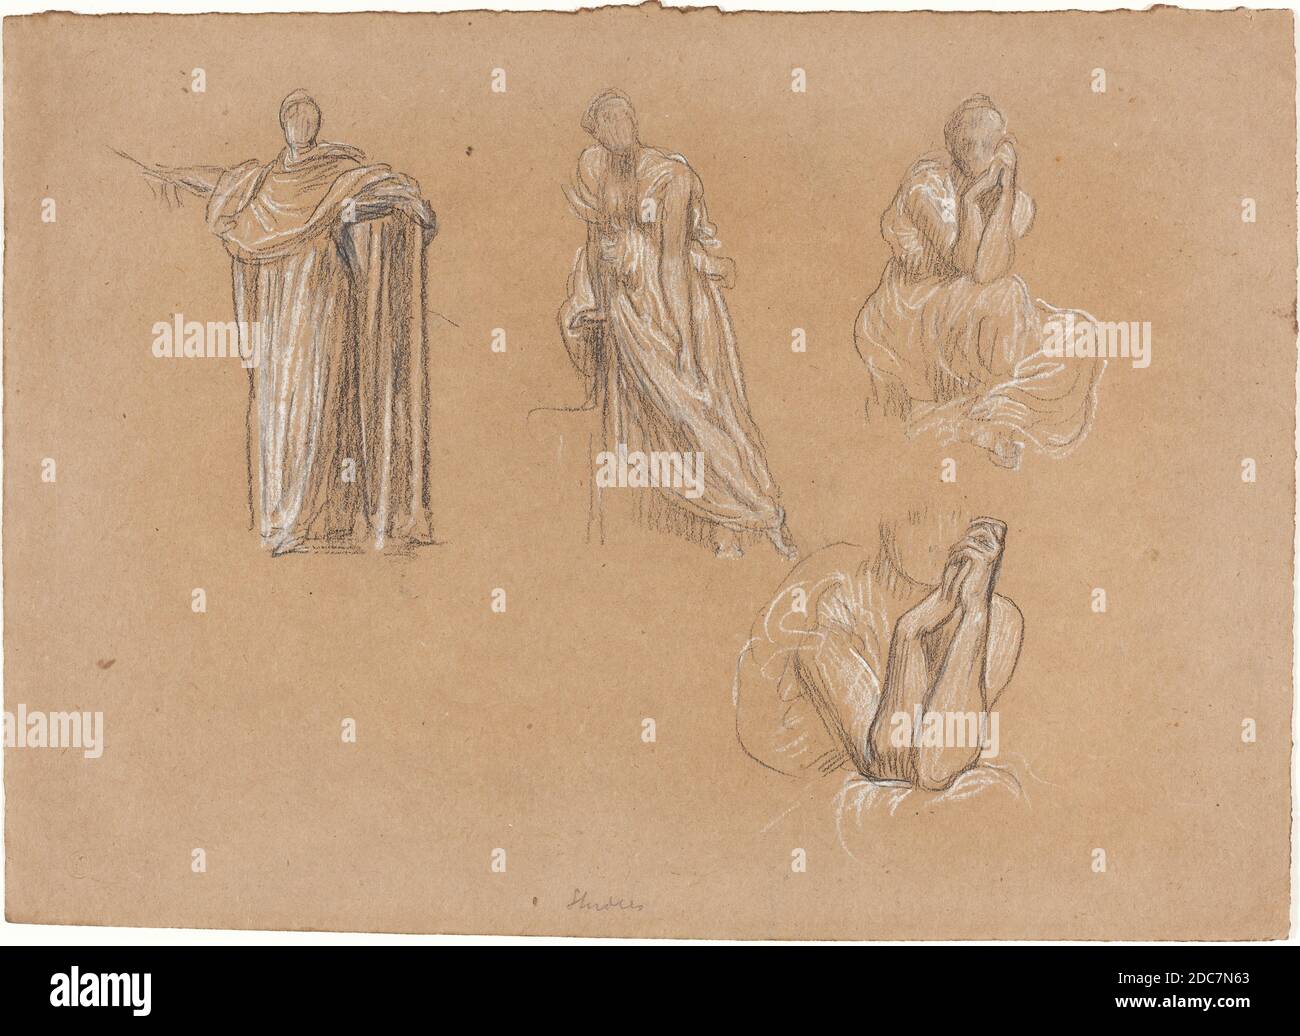 Frederic, Lord Leighton, (artist), British, 1830 - 1896, Figure Studies, black chalk heightened with white on brown wove paper, overall: 23.2 x 32.7 cm (9 1/8 x 12 7/8 in Stock Photo